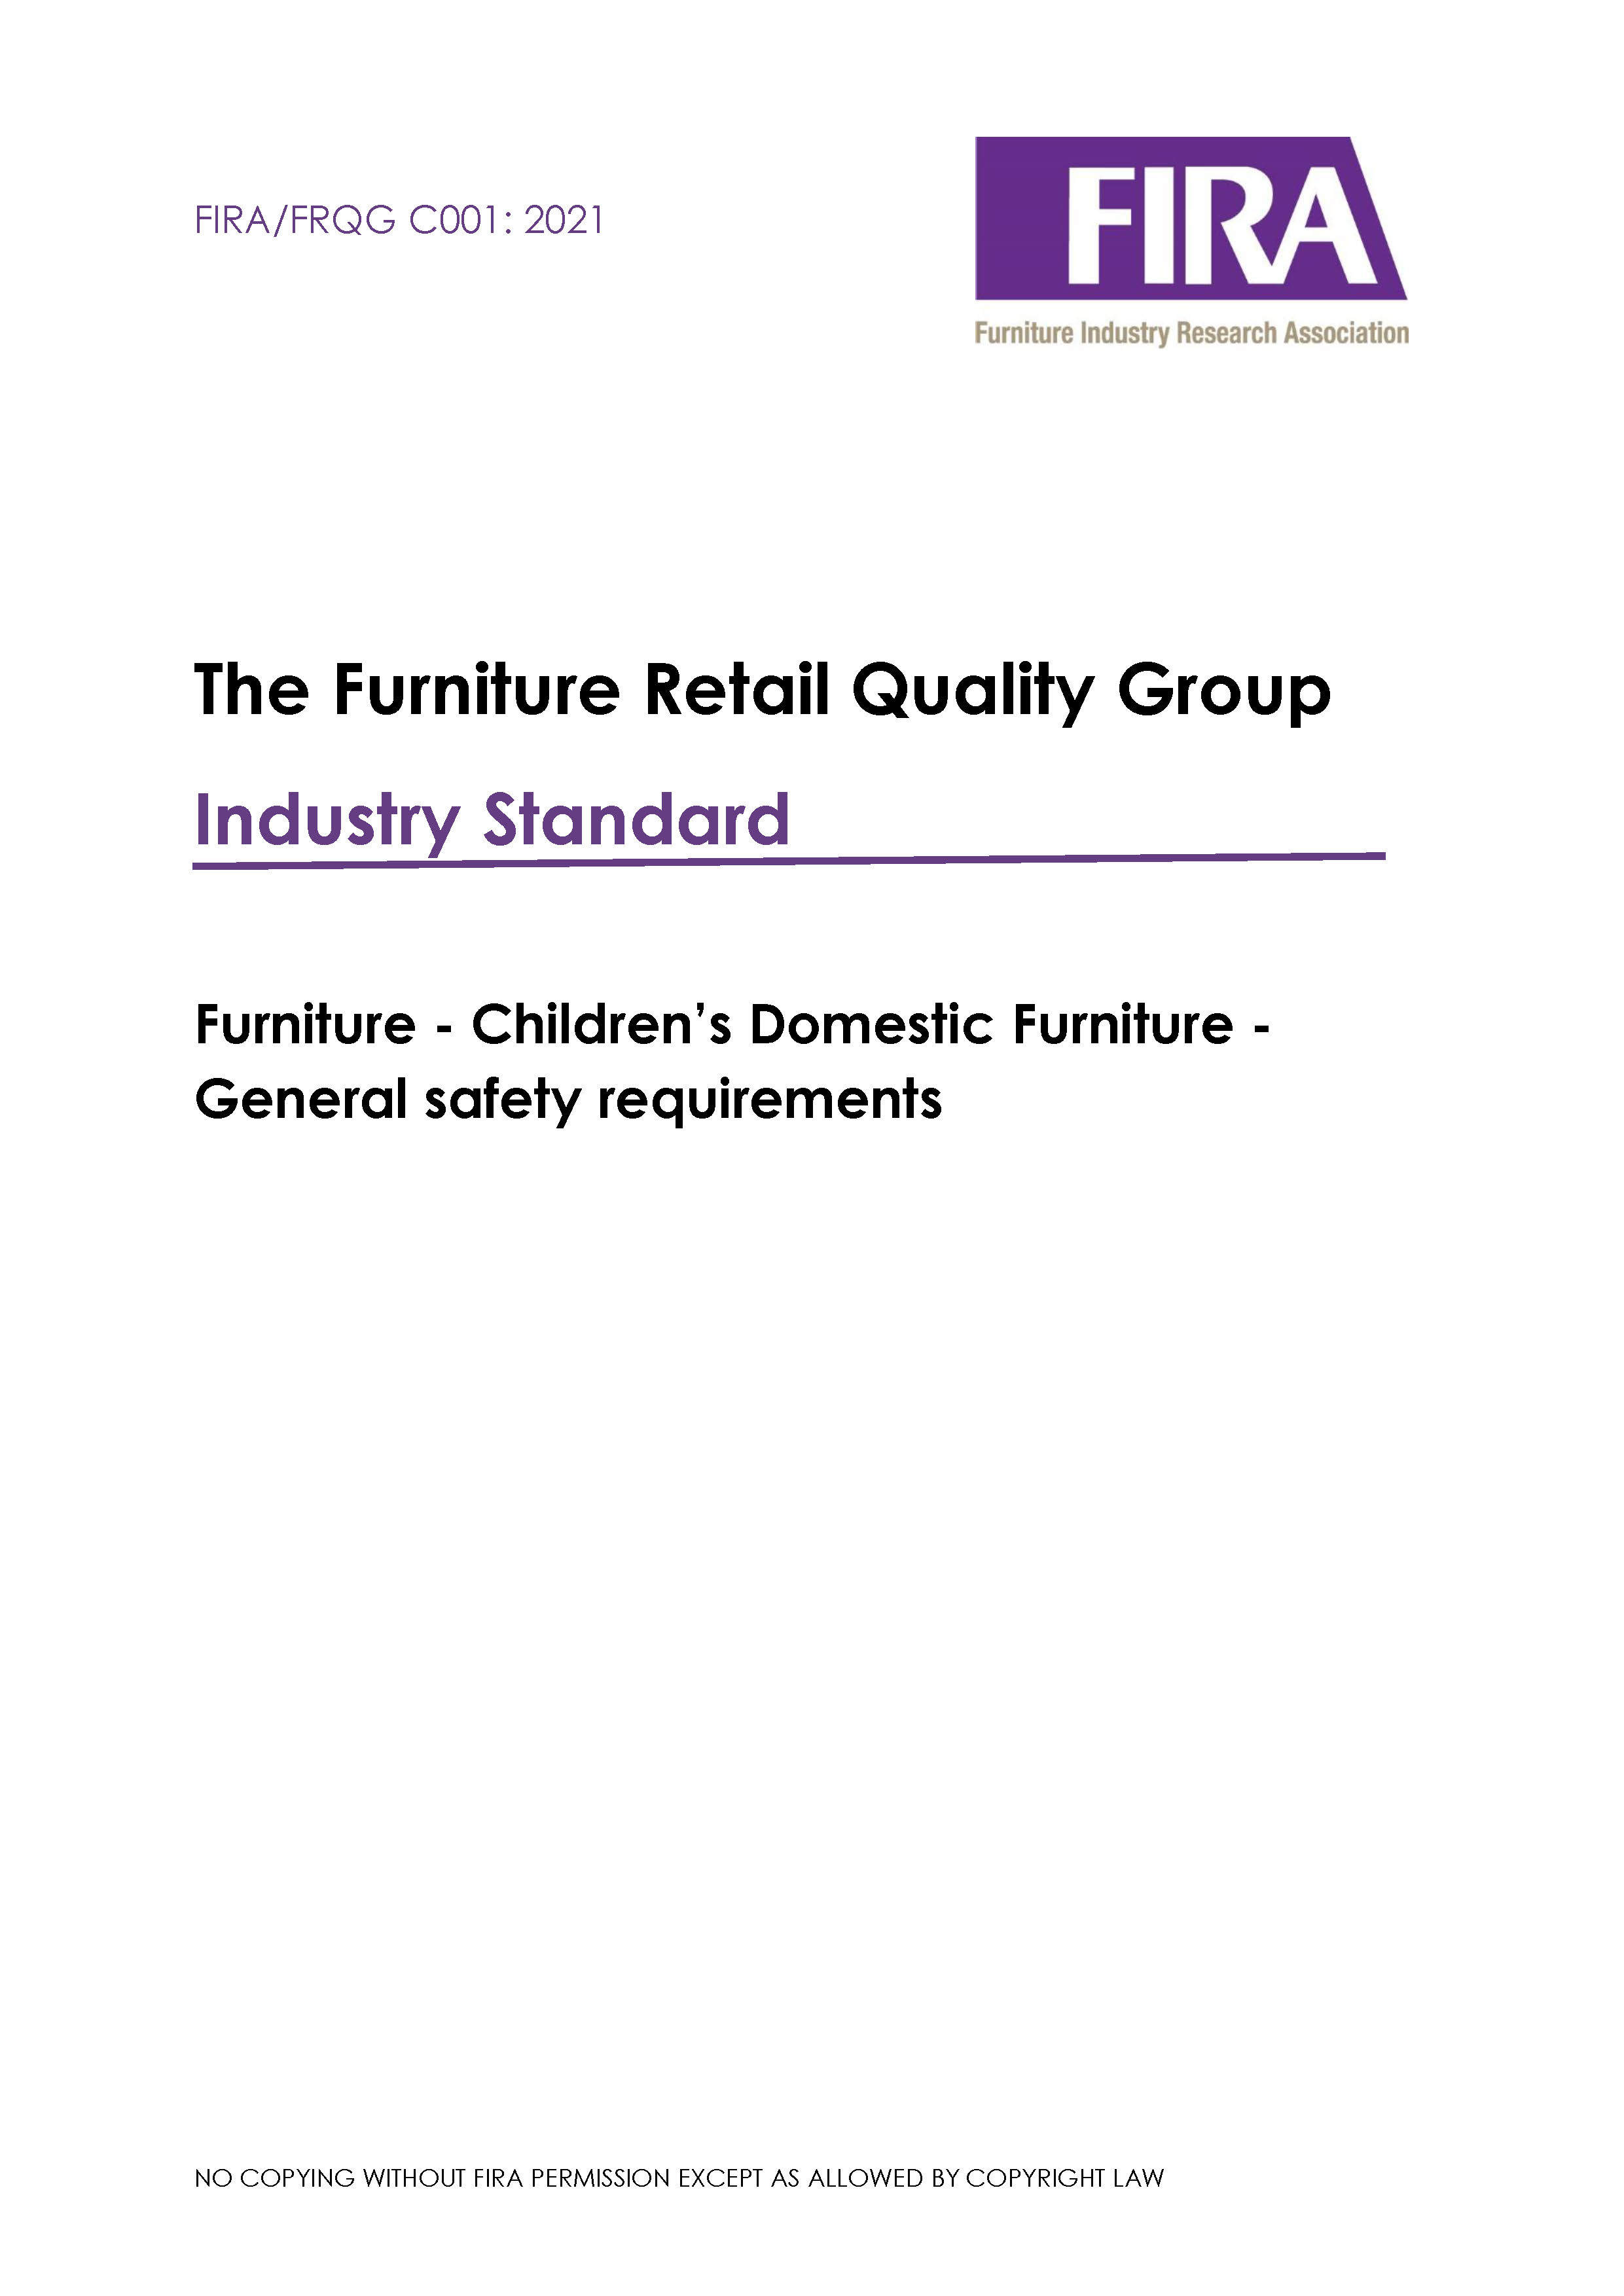 Children's Domestic Furniture Industry Standard: General Safety Requirements FIRA/FRQG C001: 2021